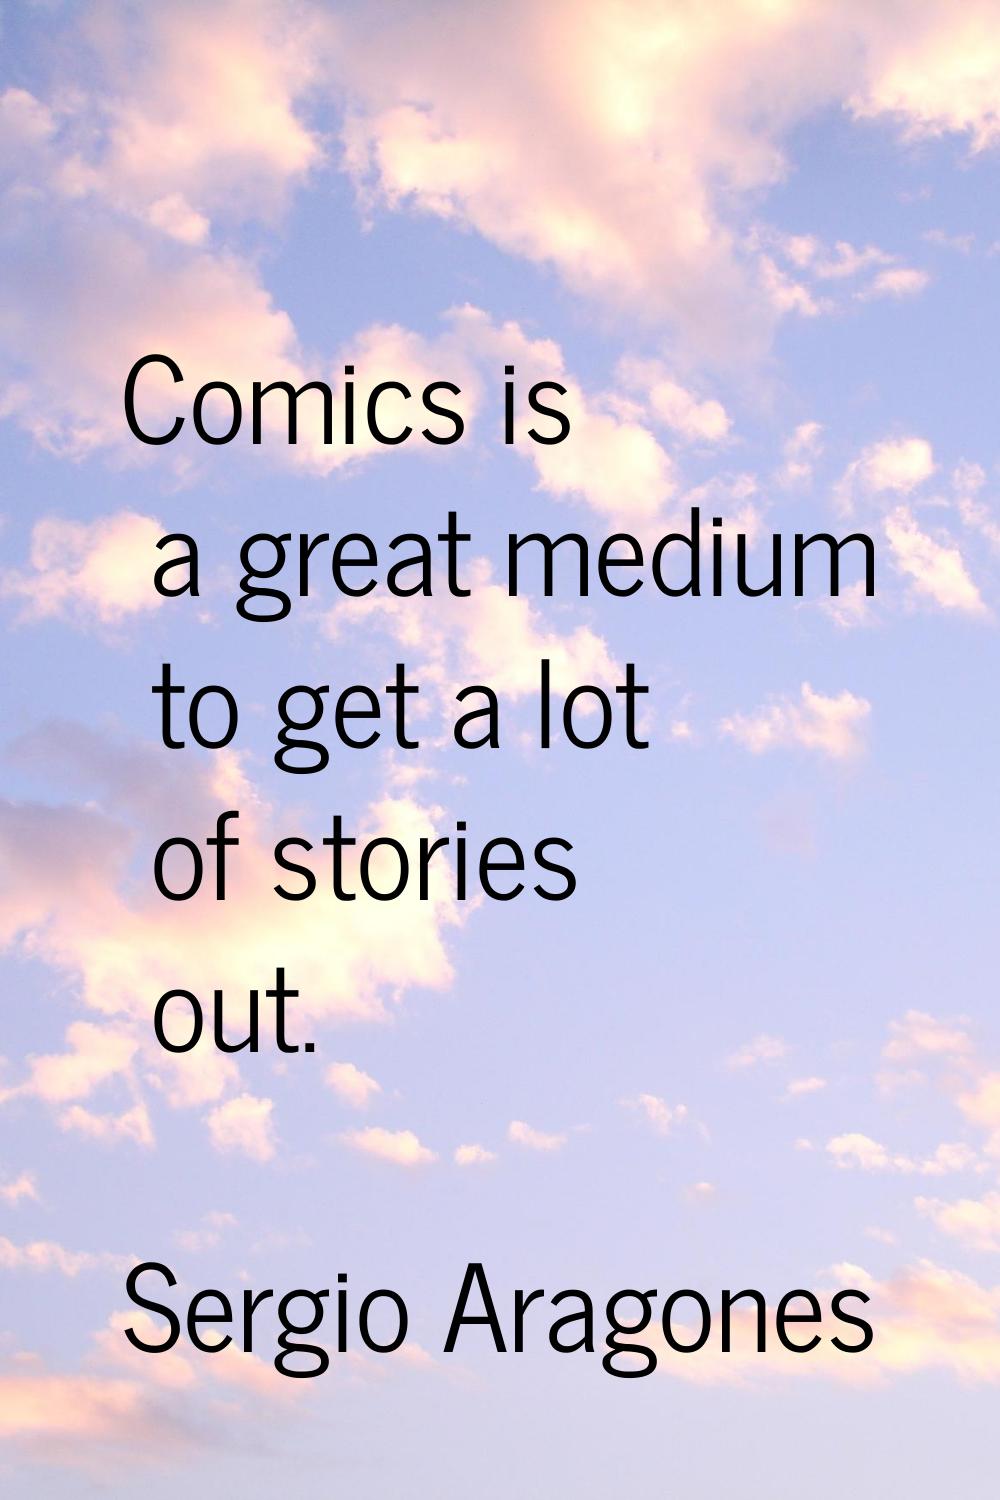 Comics is a great medium to get a lot of stories out.